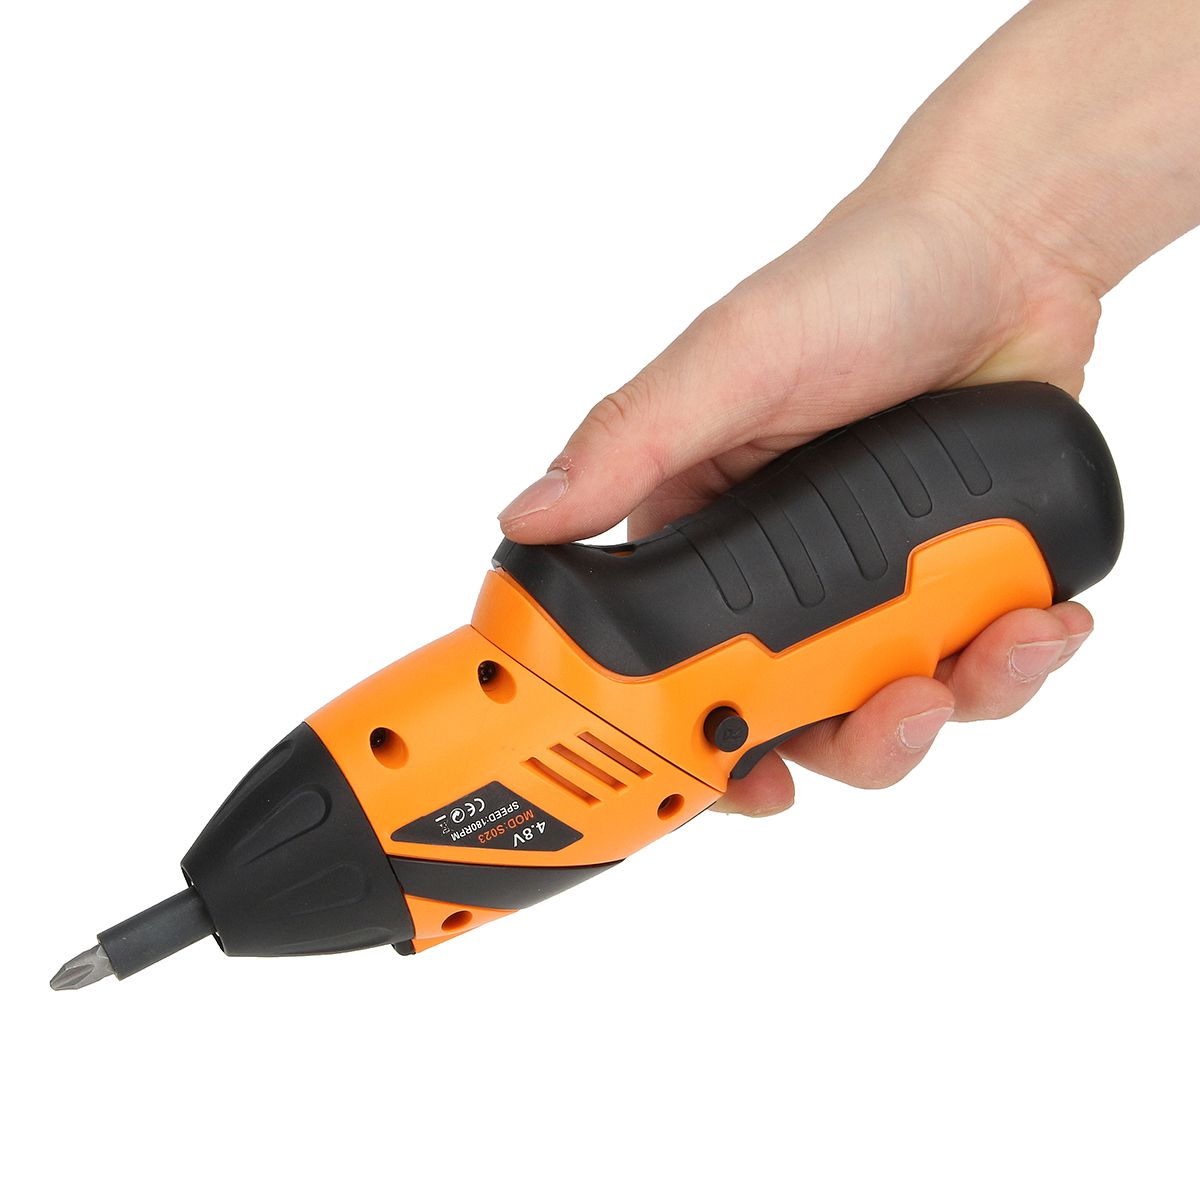 DCTOOLS-45-In-1-Non-slip-Electric-Drill-Cordless-Screwdriver-Foldable-with-US-Charger-1145930